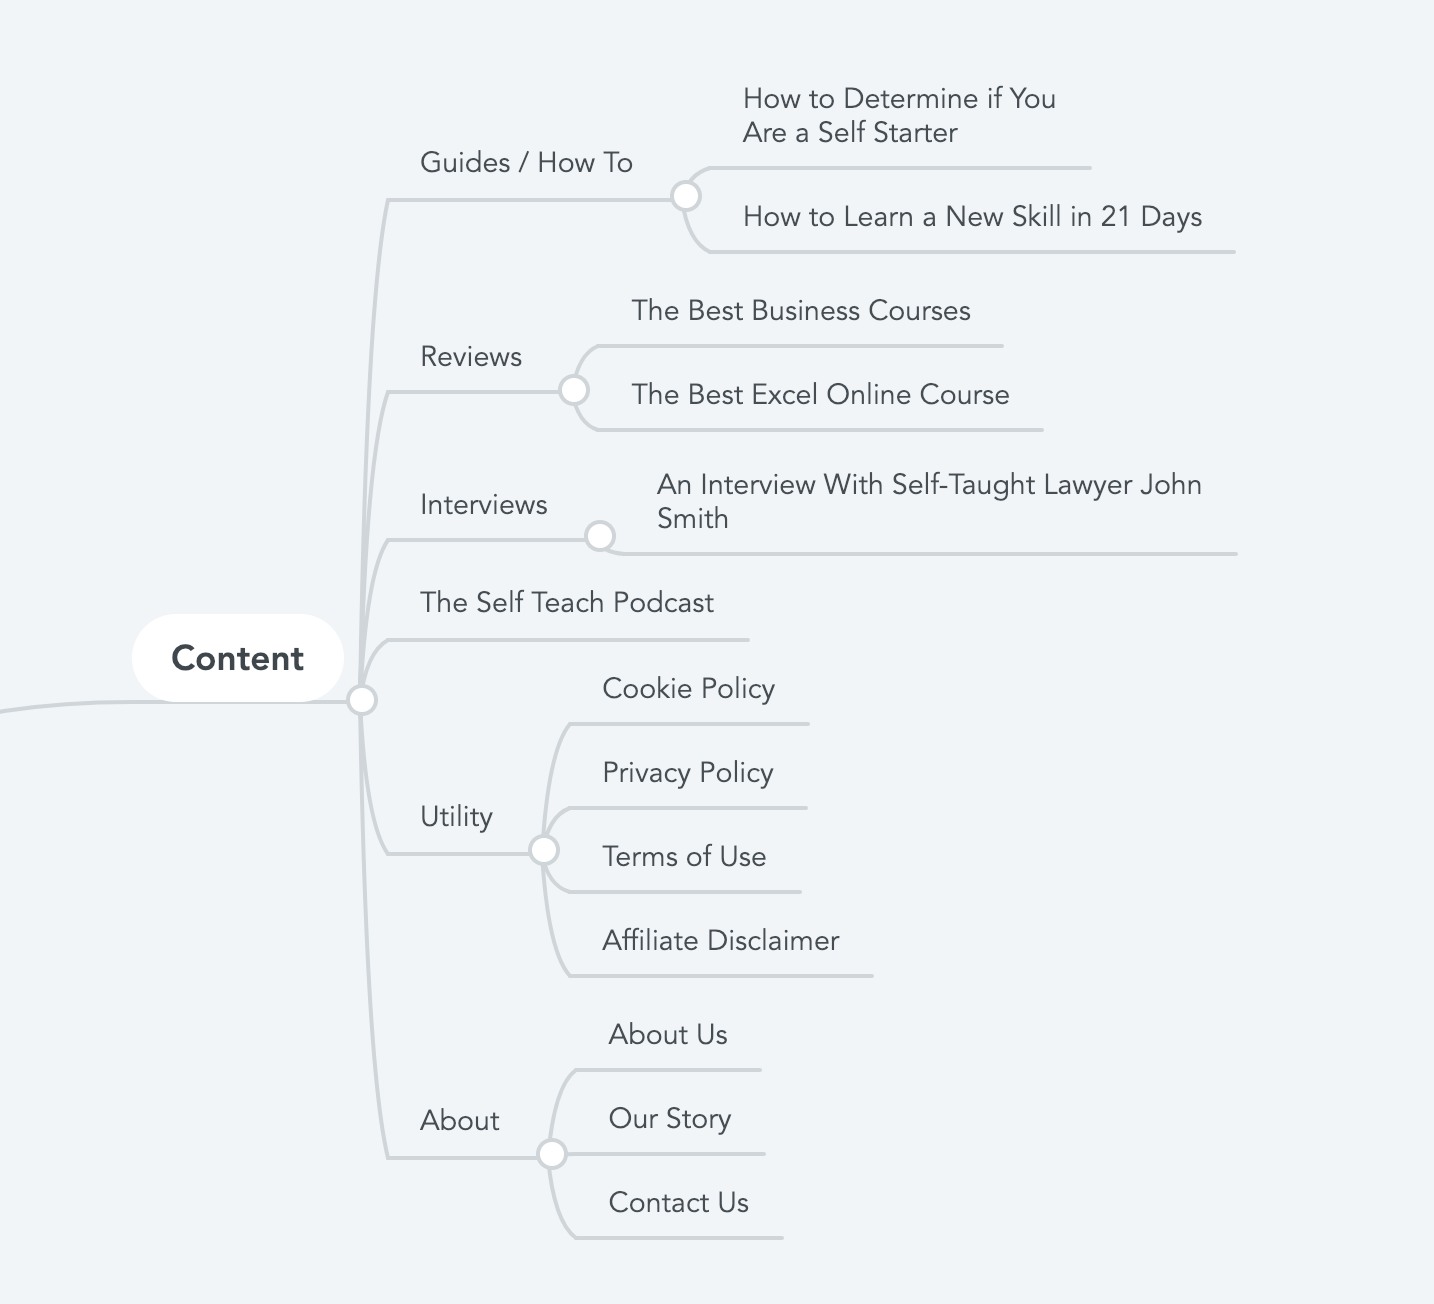 Mind mapping a website plan and focusing in on the content section example.